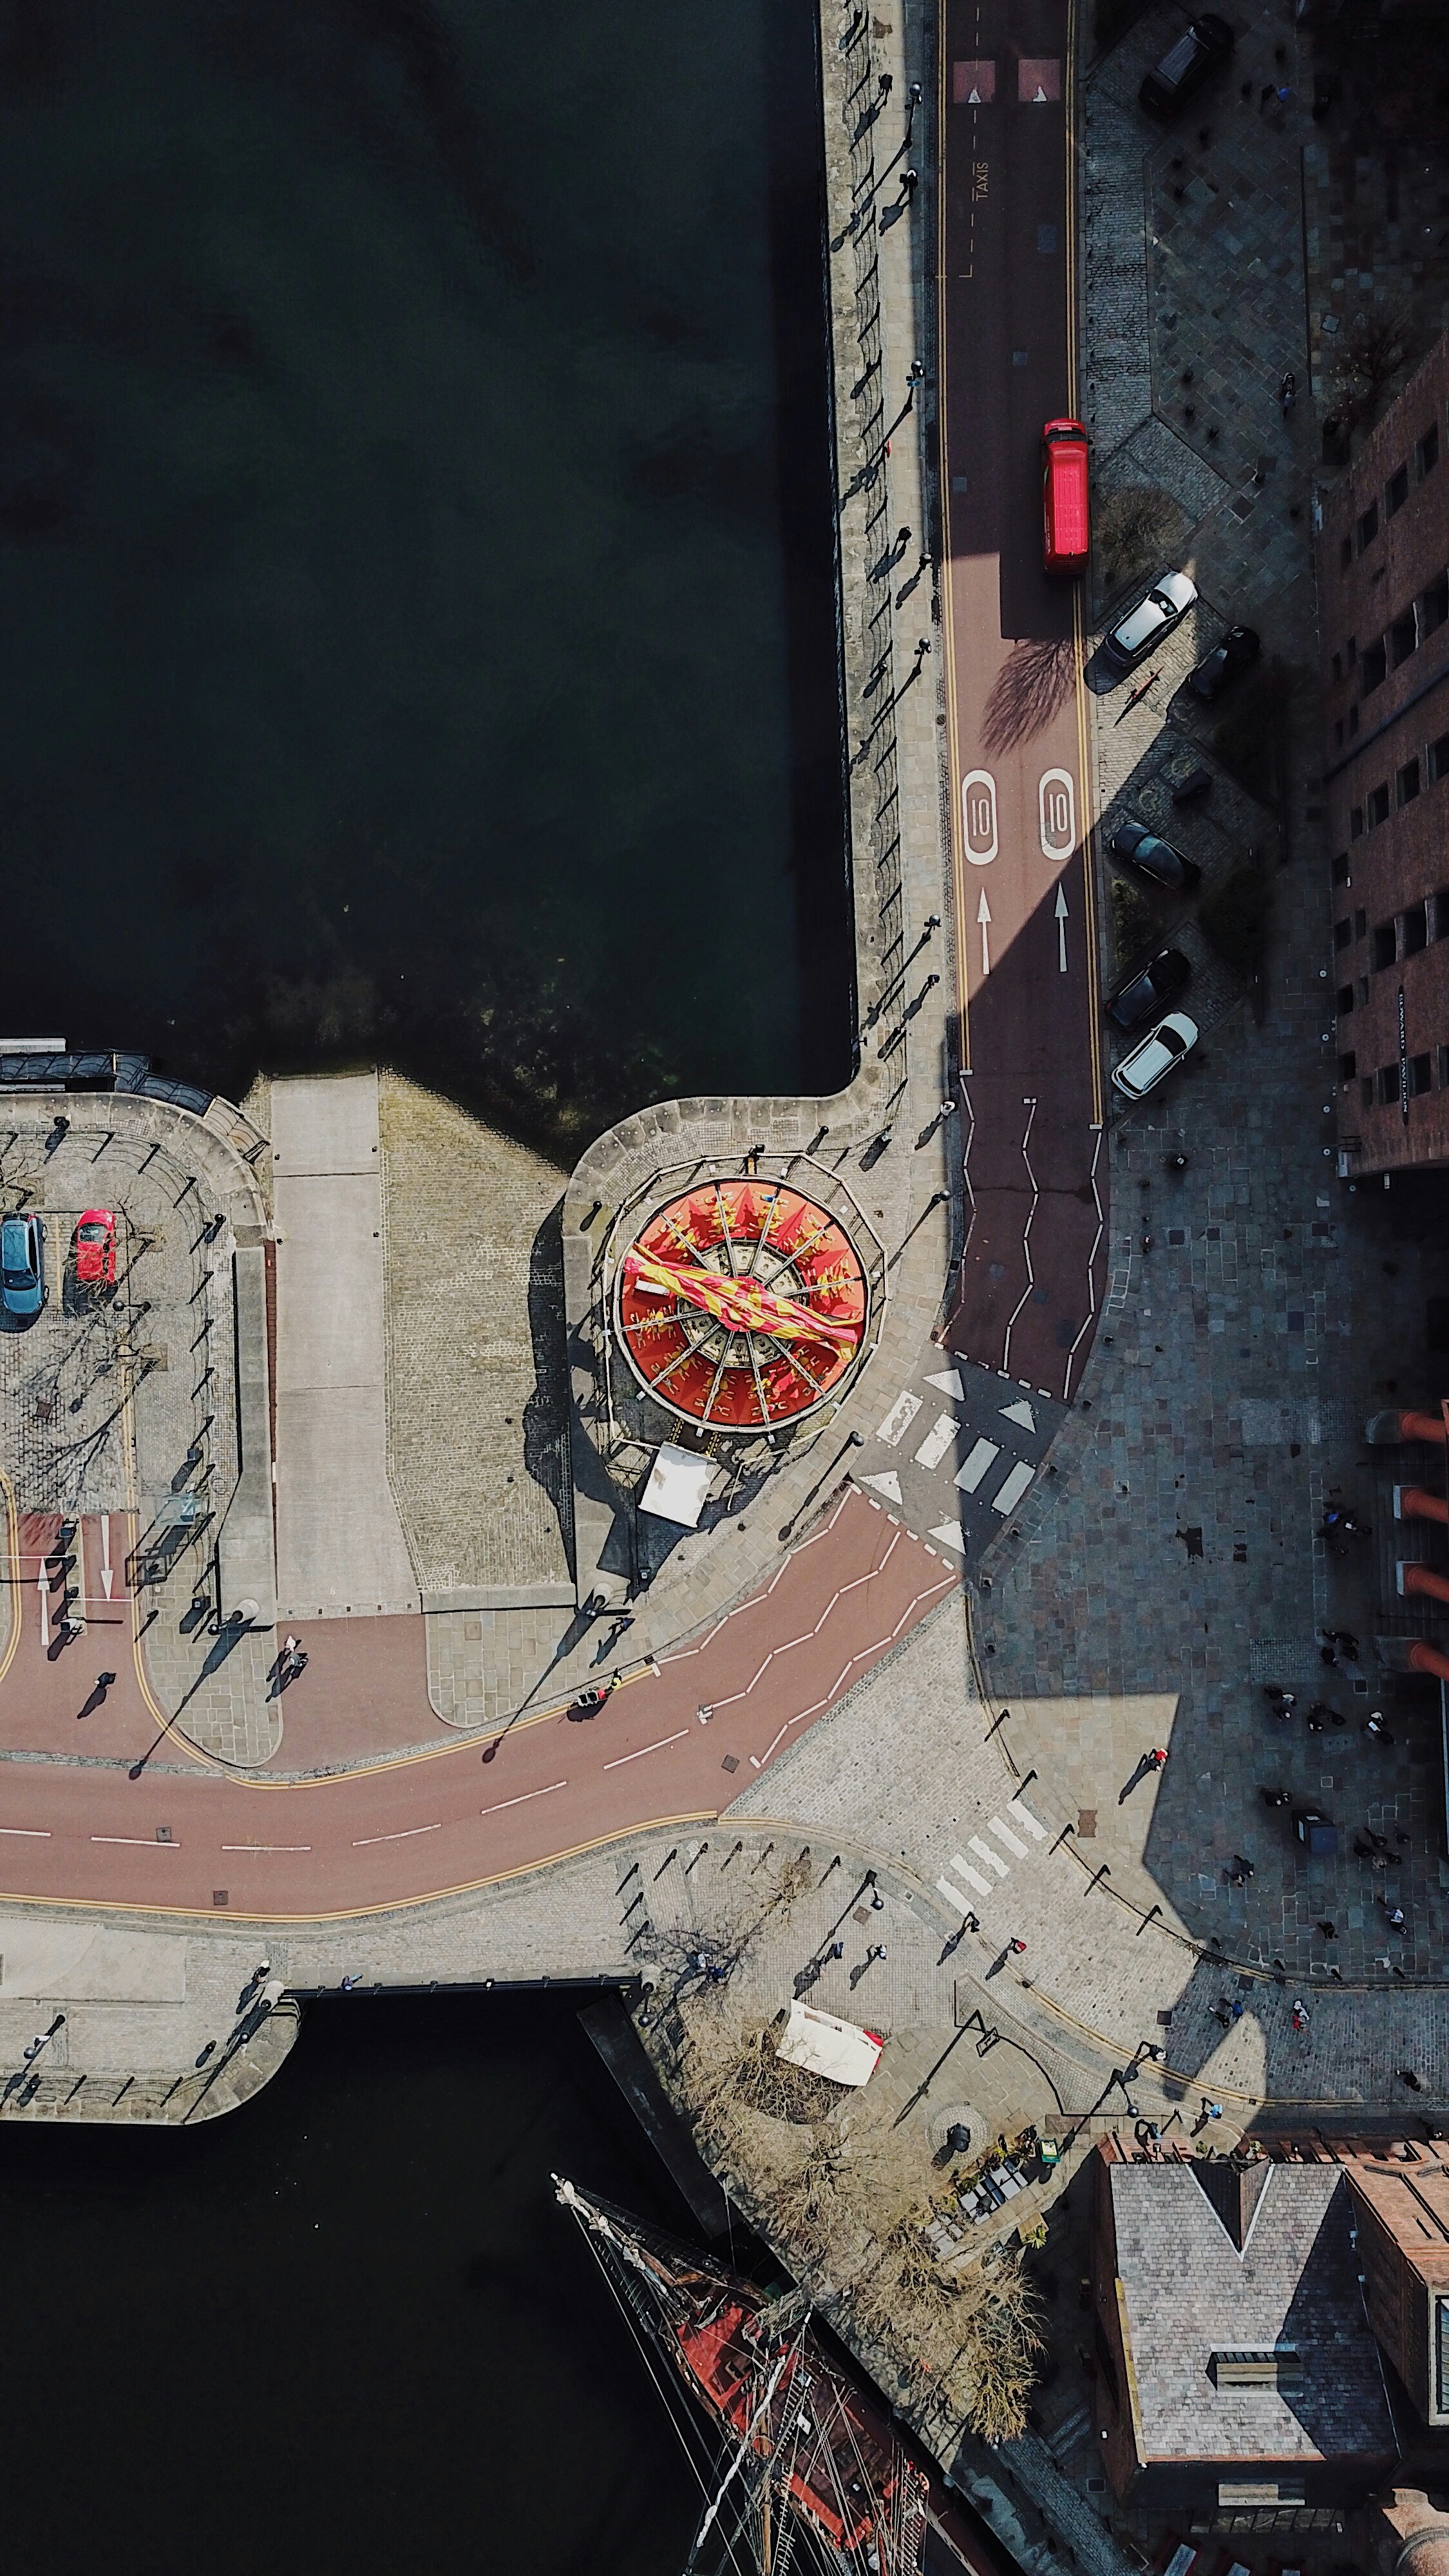 A top down drone view of the Albert Dock, Liverpool, photo was taken with a DJI Mavic Pro drone